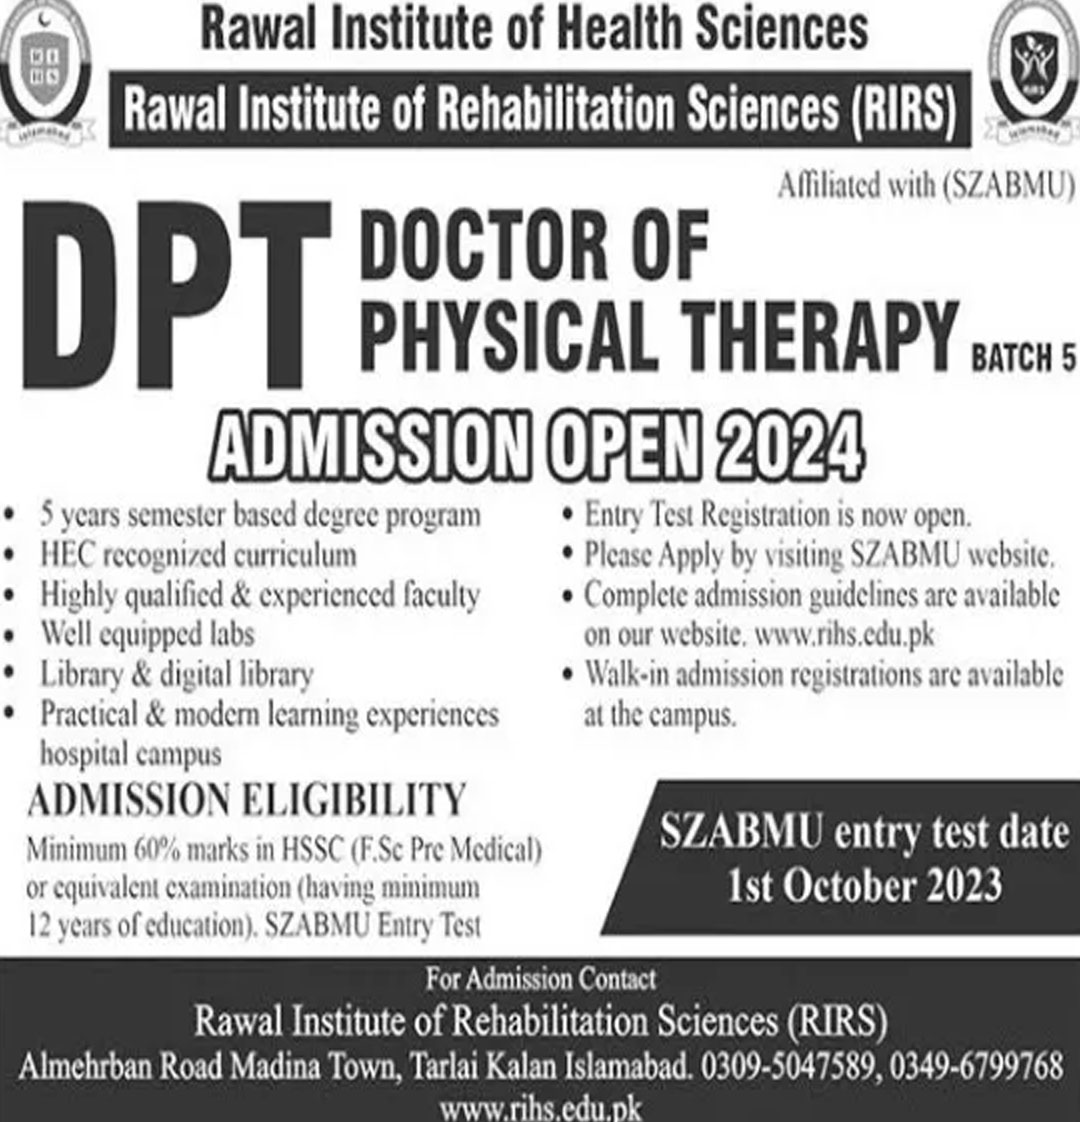 Rawal Institute of Health Sciences Islamabad admission 2023